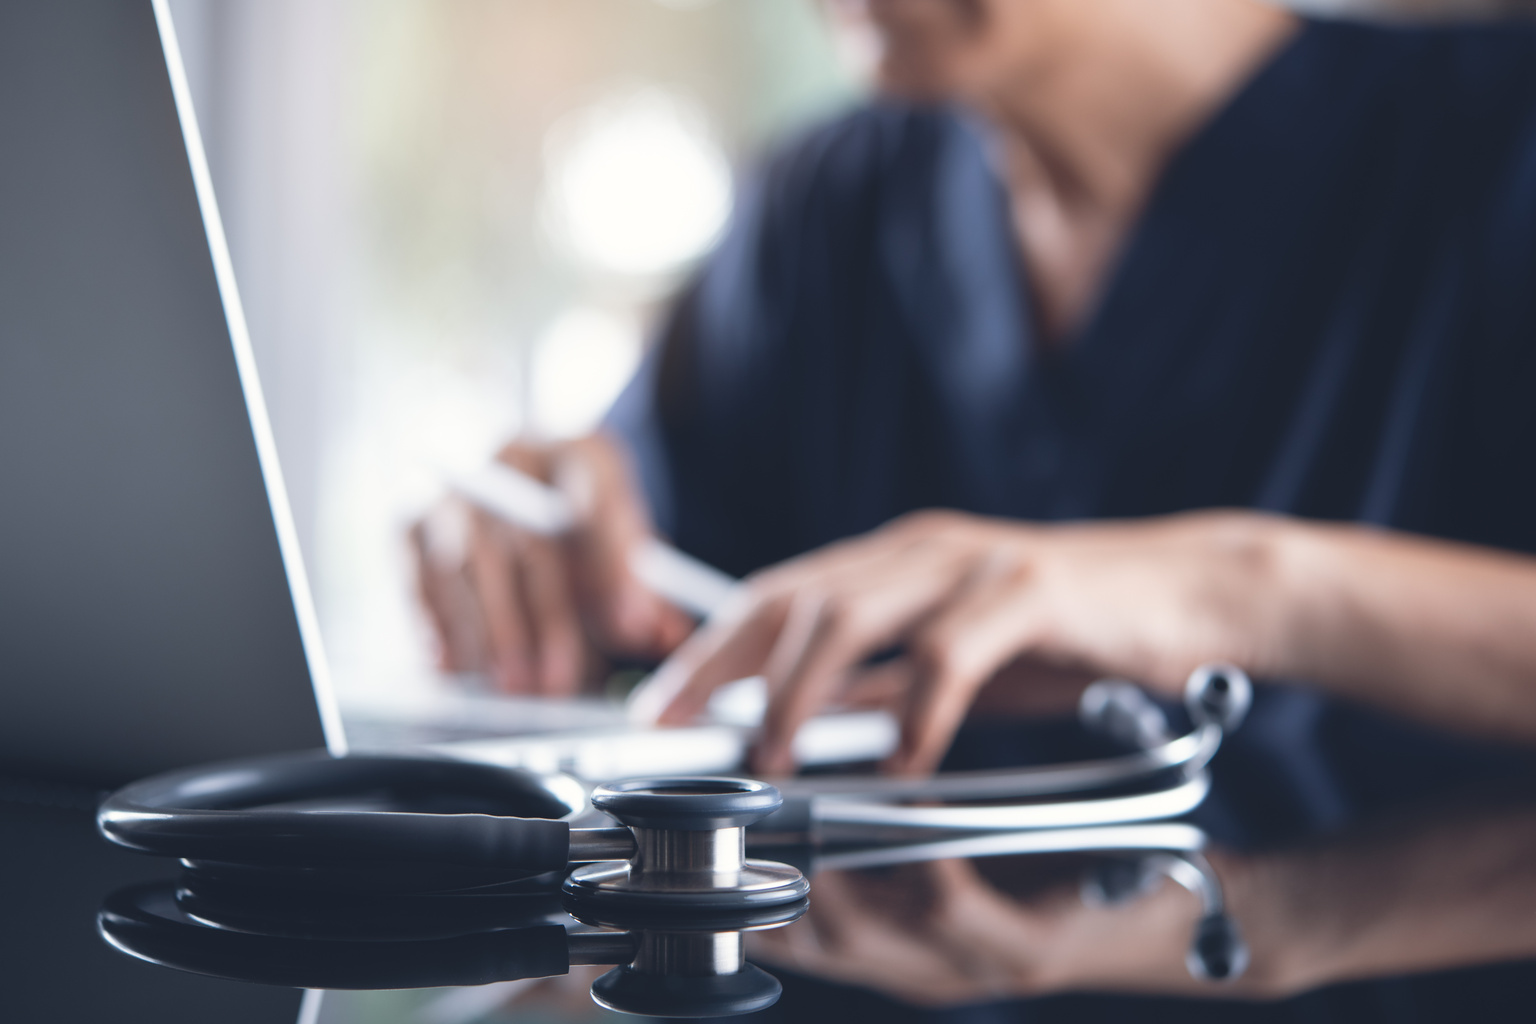 Doctor working on laptop computer with stethoscope in focus in foreground